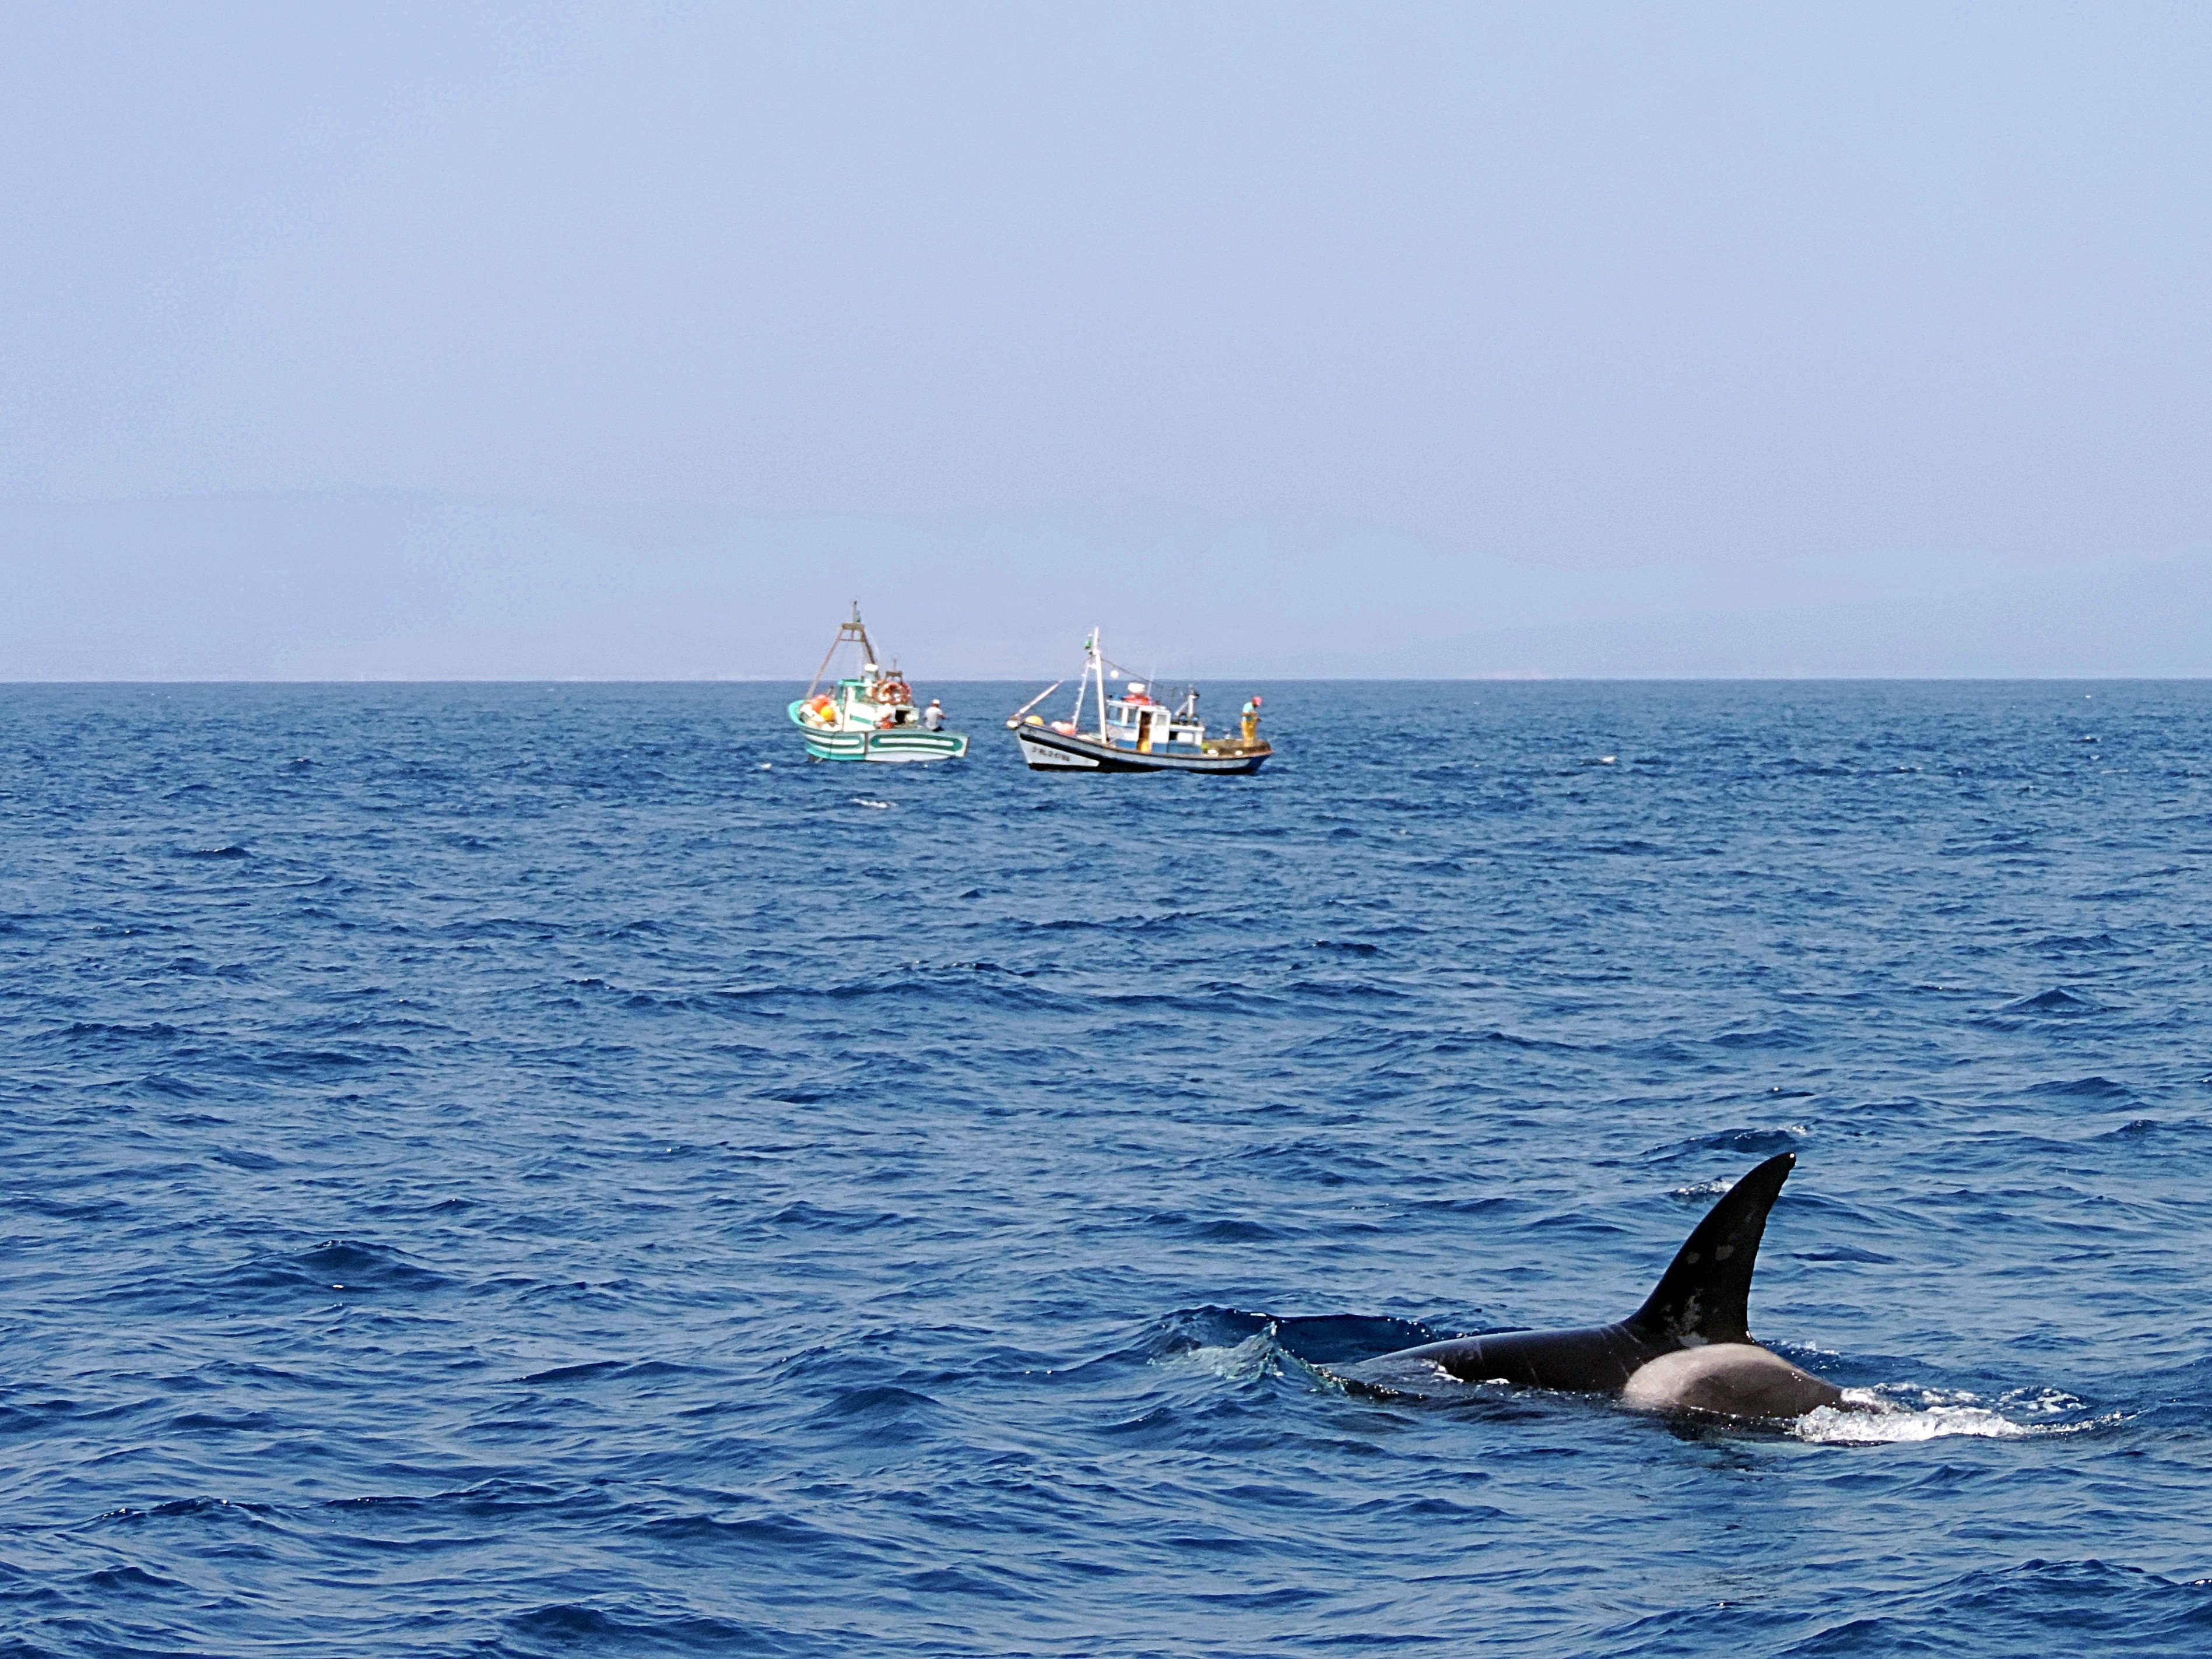 An Orca whale in the Mediterranean Sea, off the coast of Spain. File photo: Shutterstock
